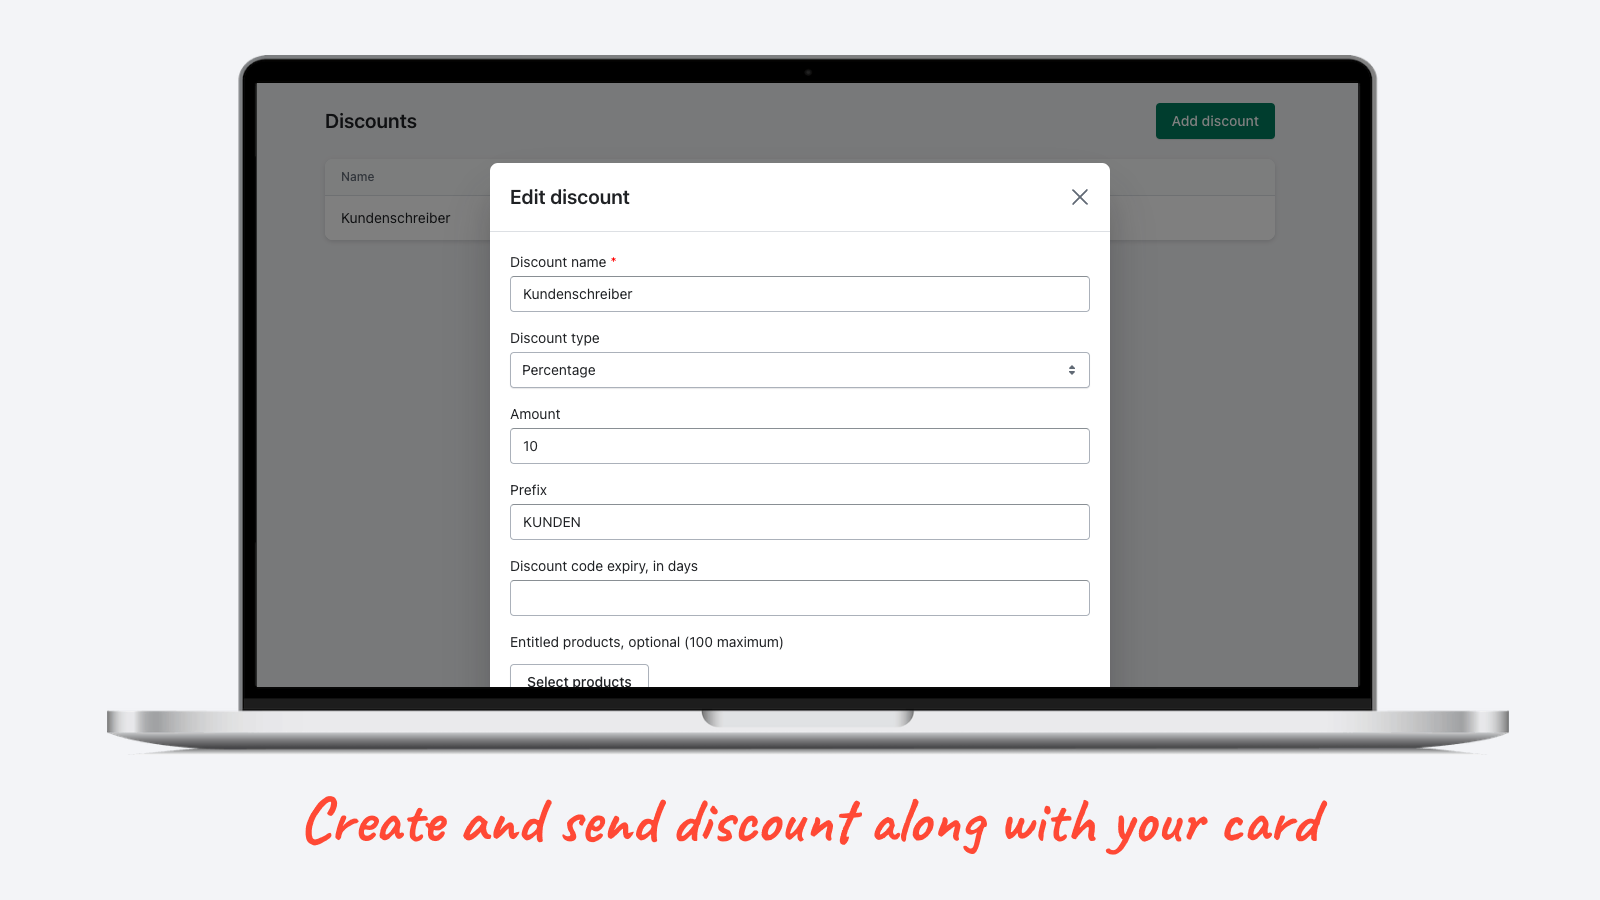 Create and send discount along with your card